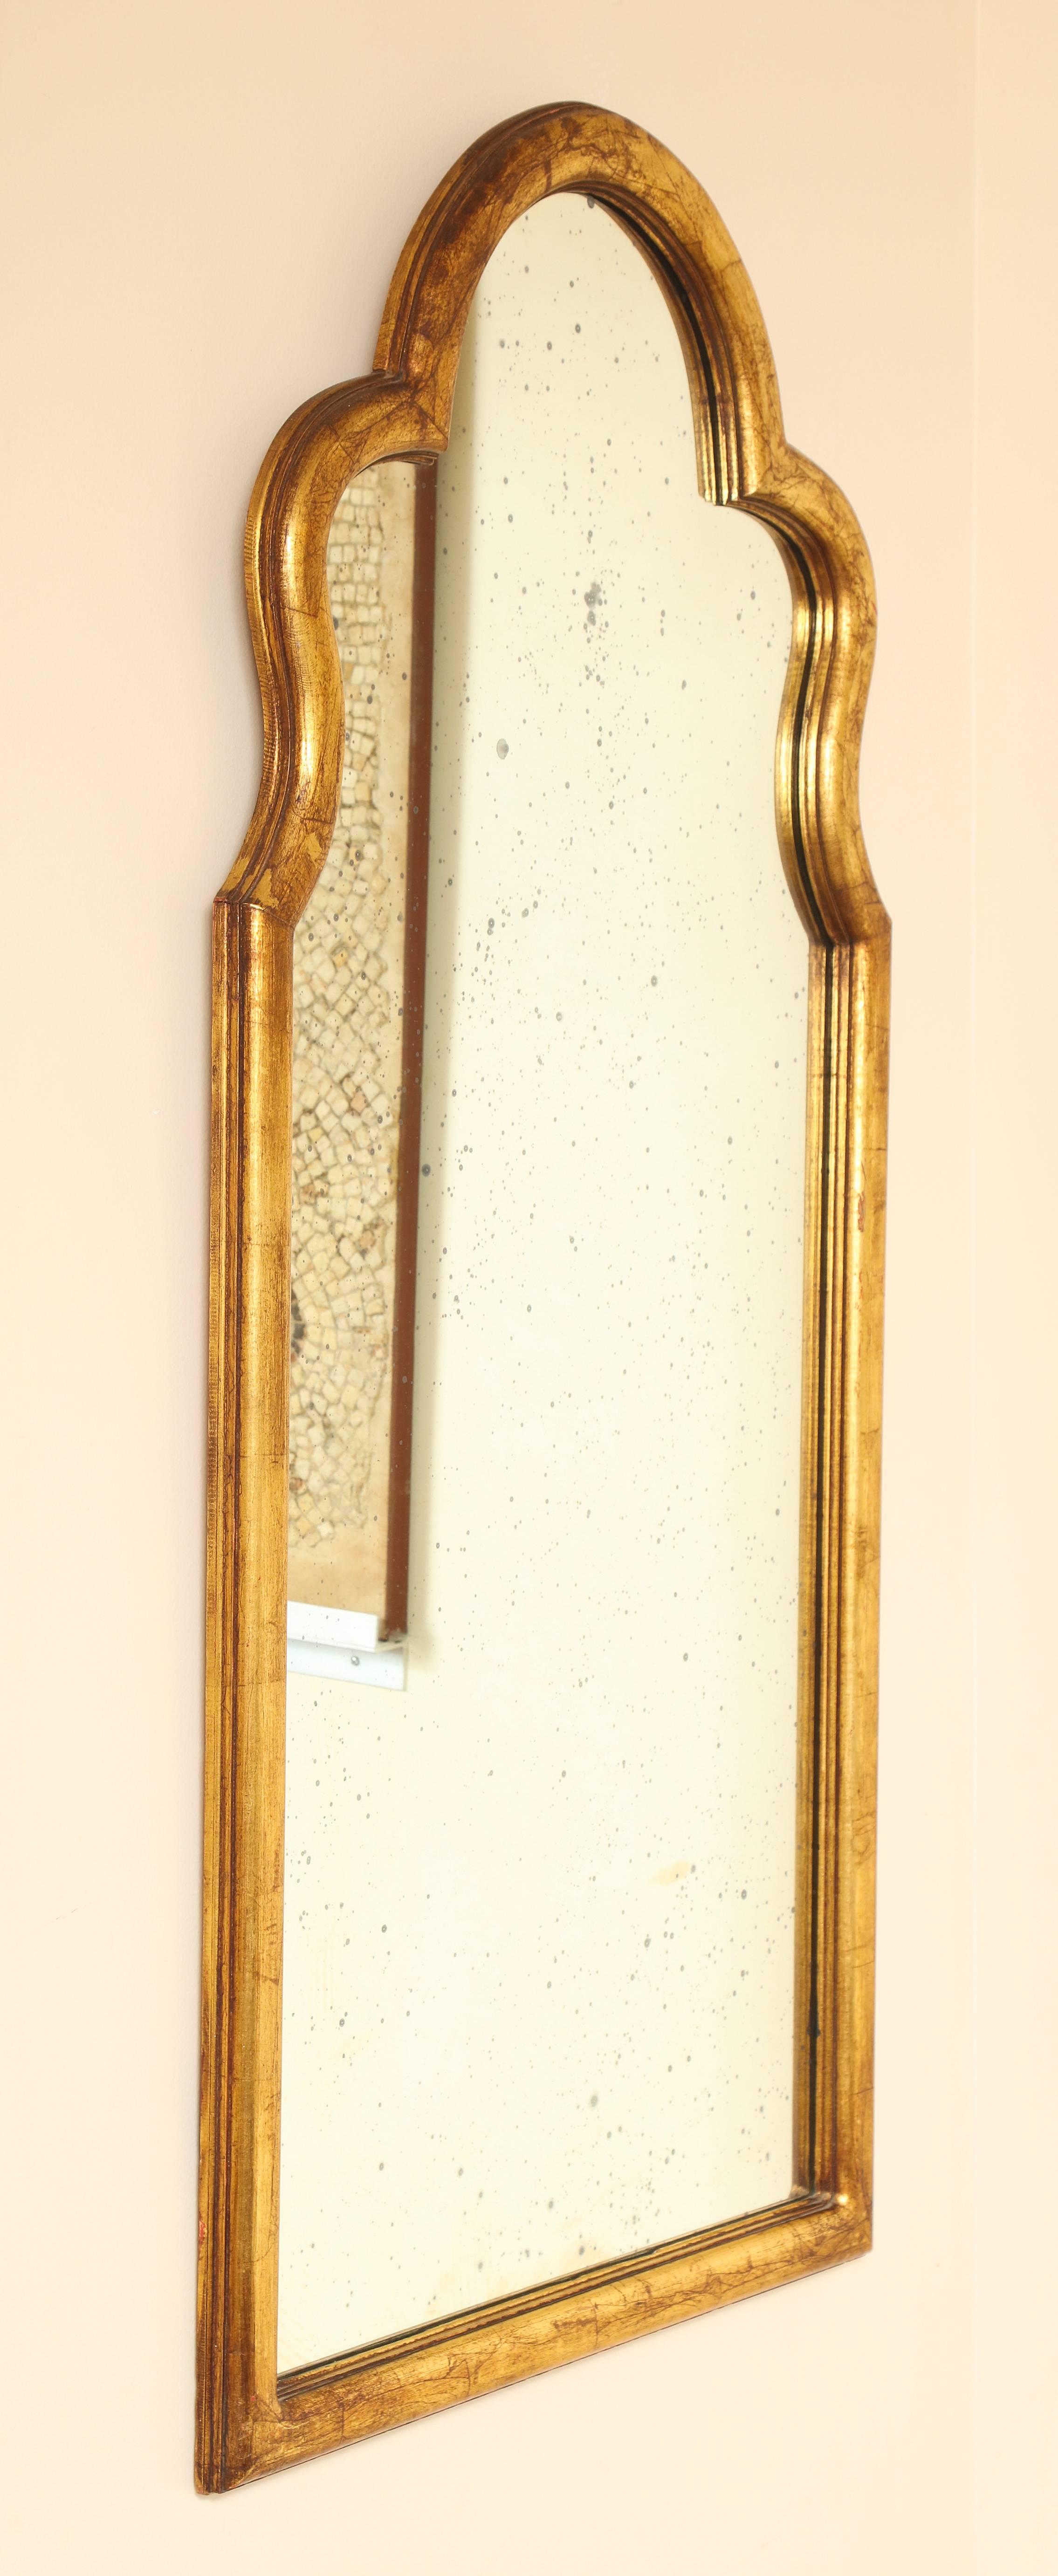 A classically shaped gilded Queen Anne inspired mirror frame with original antiqued mirrored glass.